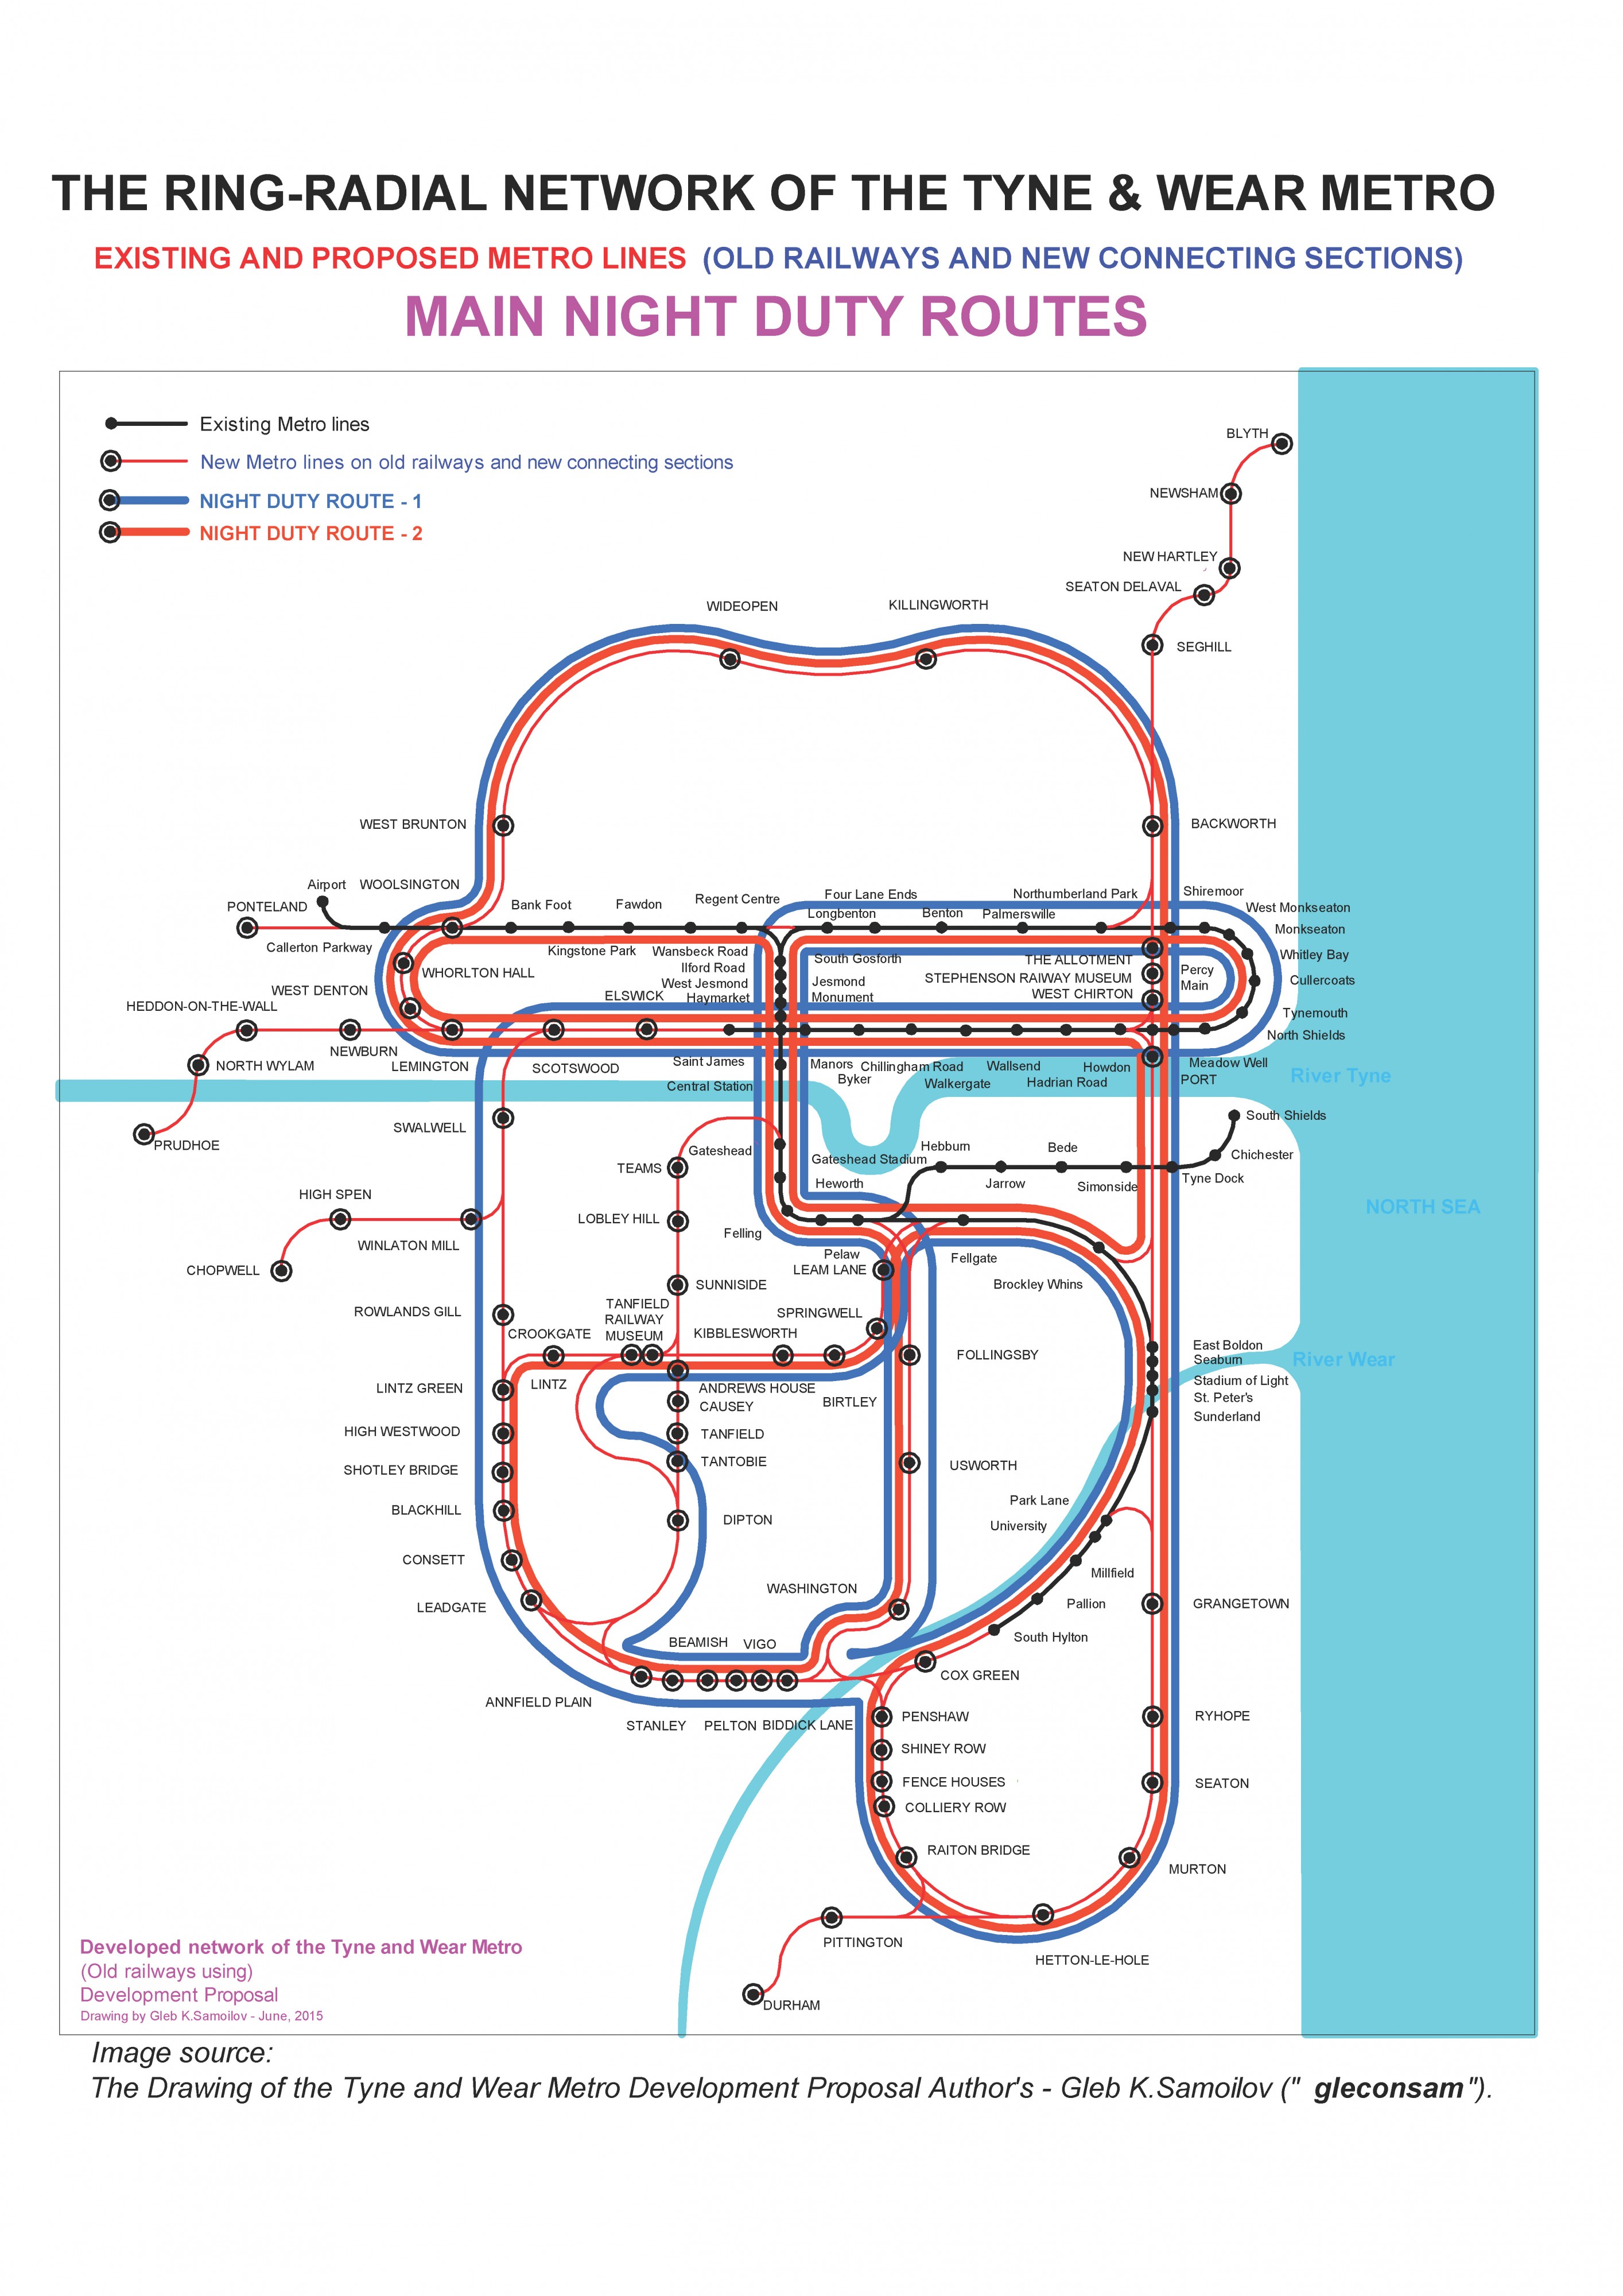 the Ring-Radial network of the Tyne and Wear Metro - night duty routes